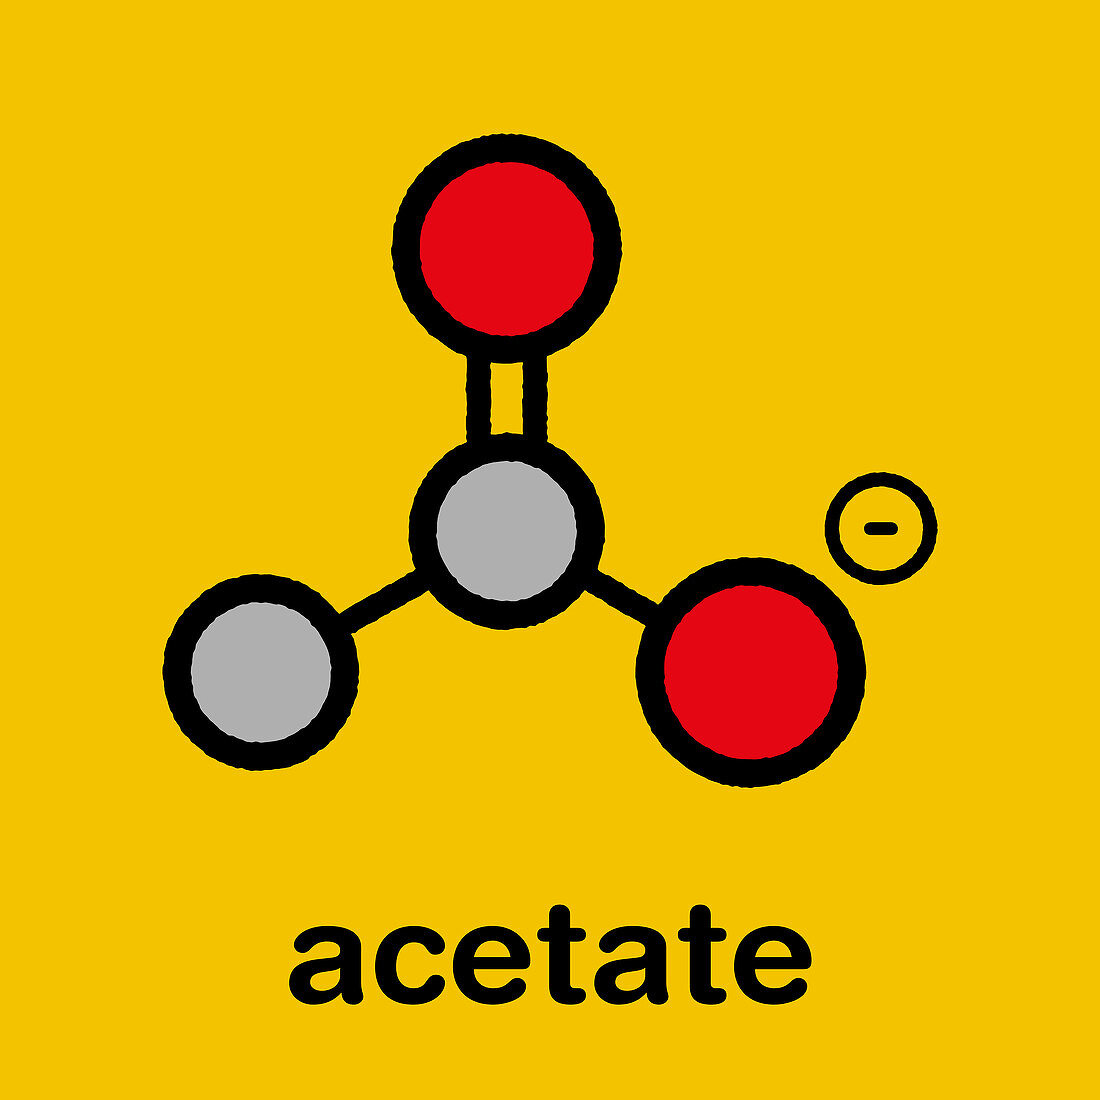 Acetate anion chemical structure, illustration